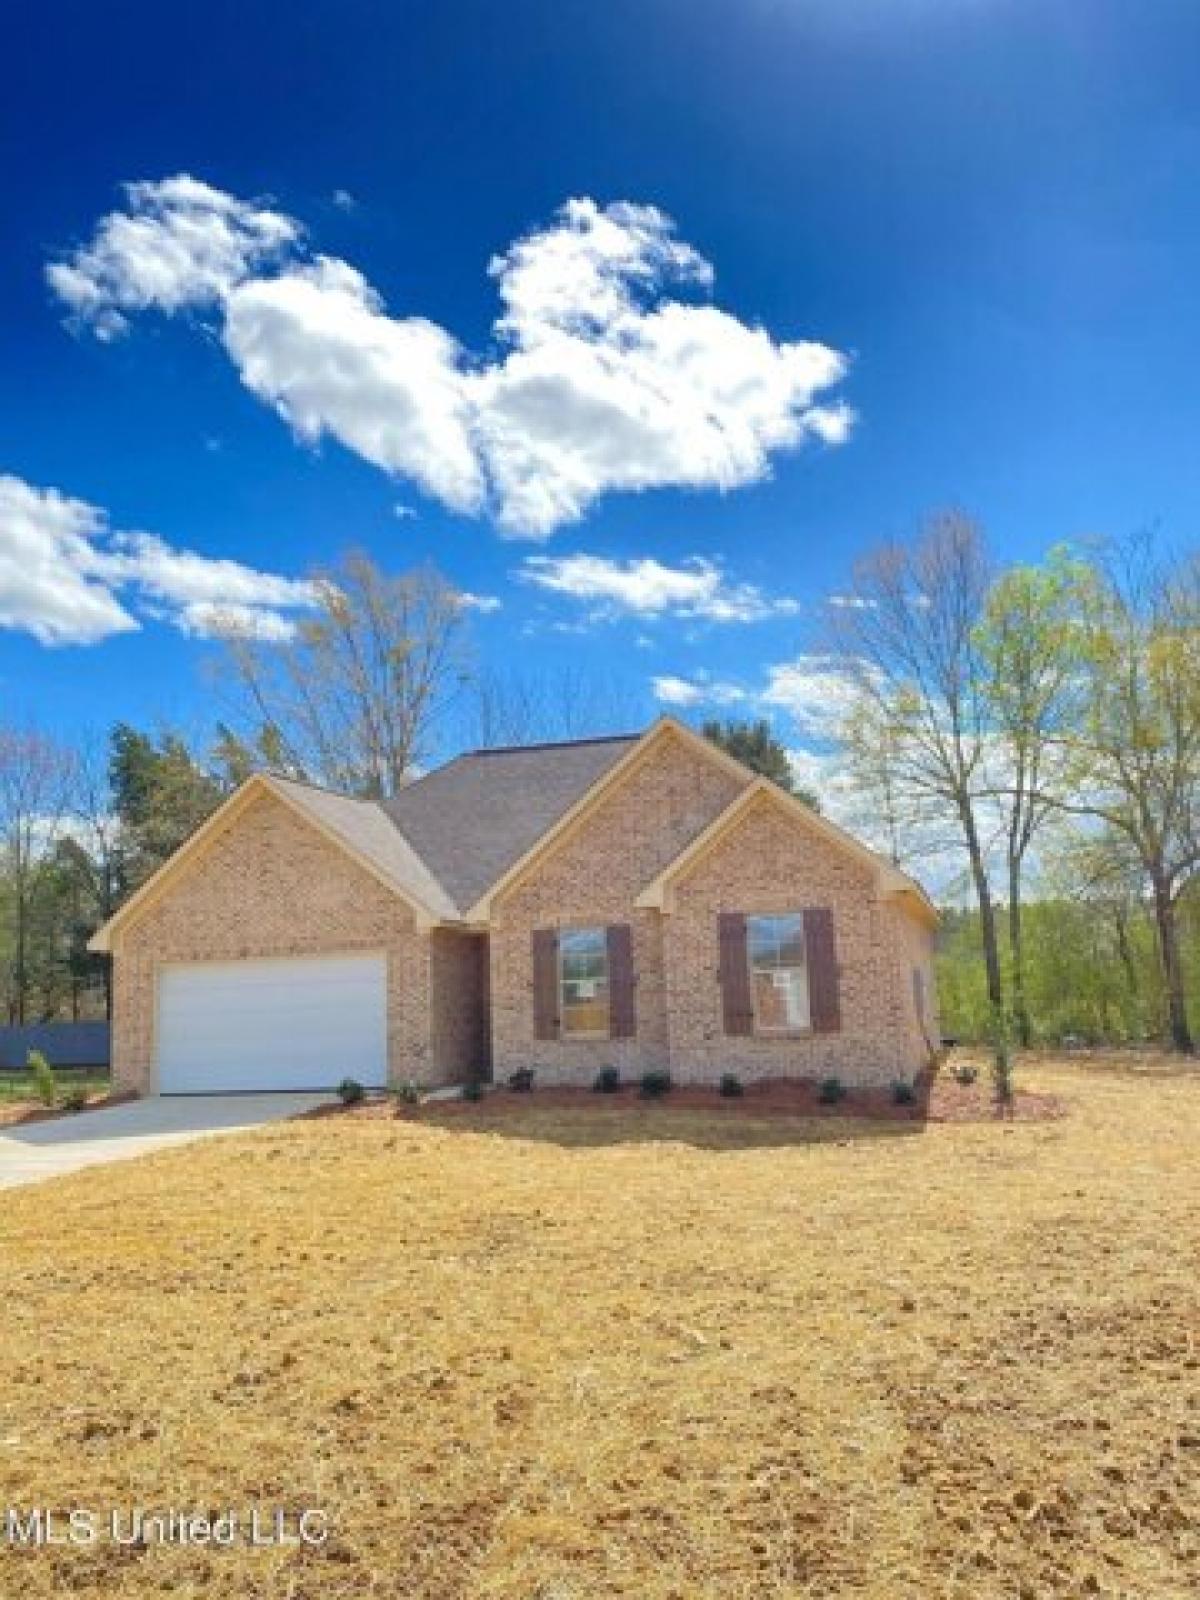 Picture of Home For Sale in Canton, Mississippi, United States